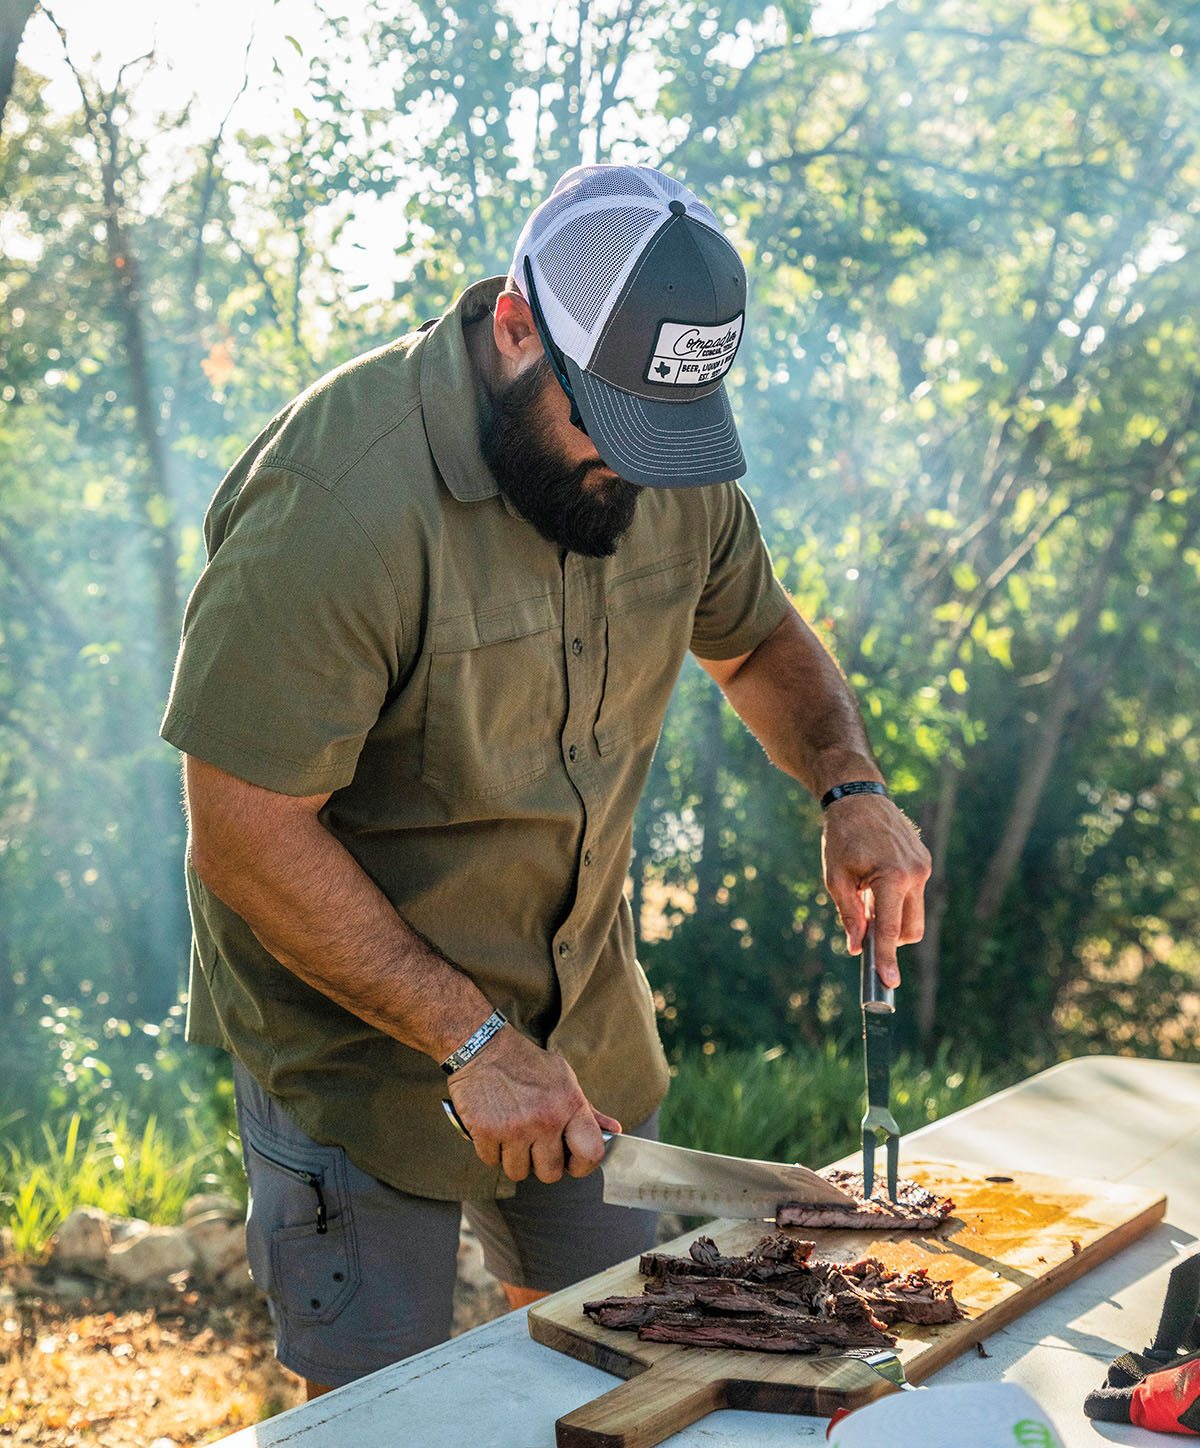 A man in a ball cap and green shirt cuts meat on a platter in an outdoor setting